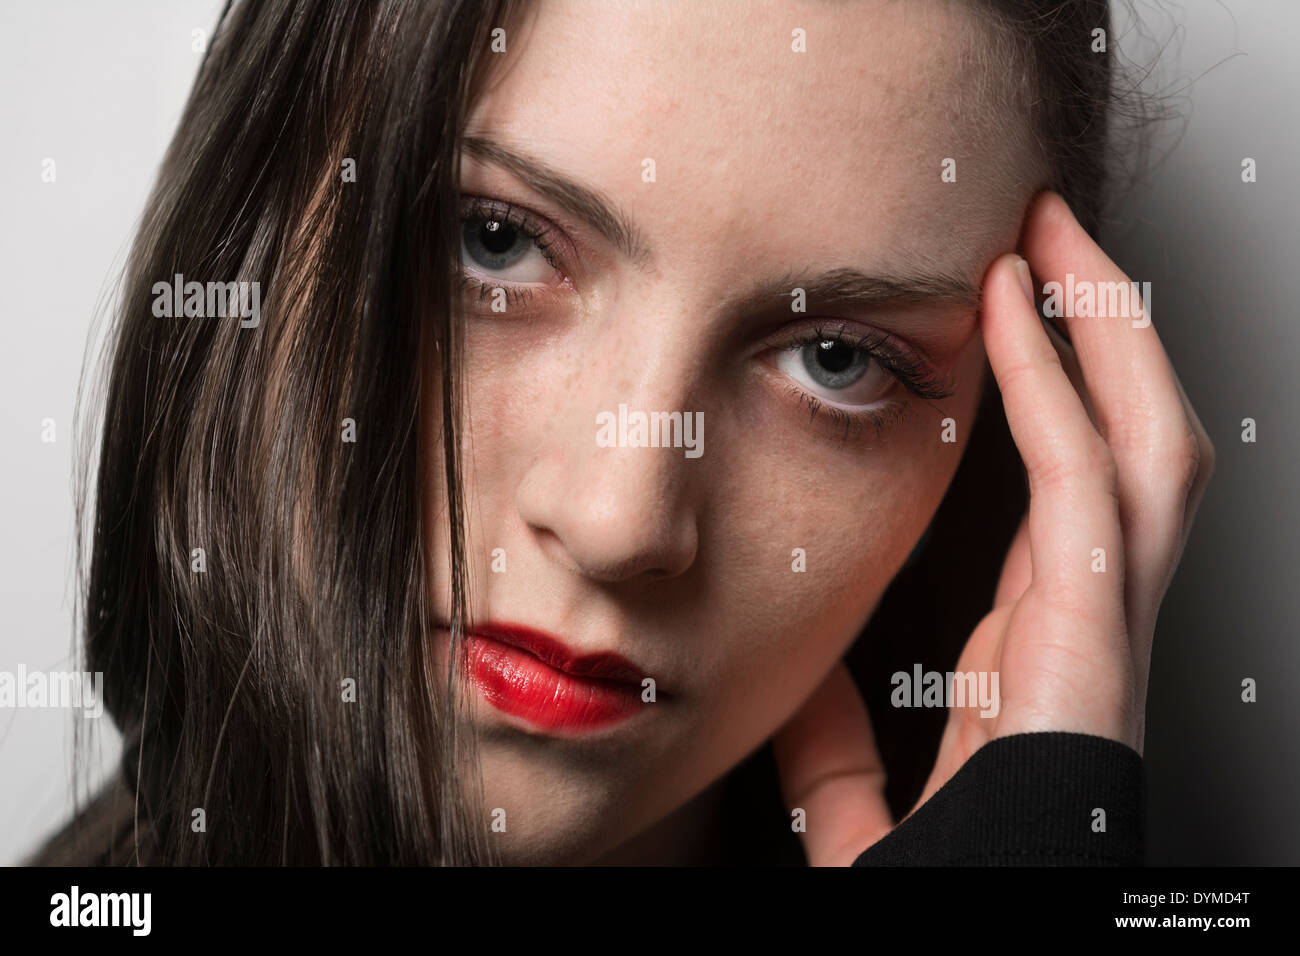 Young attractive woman with red lipstick and hand to face Stock Photo